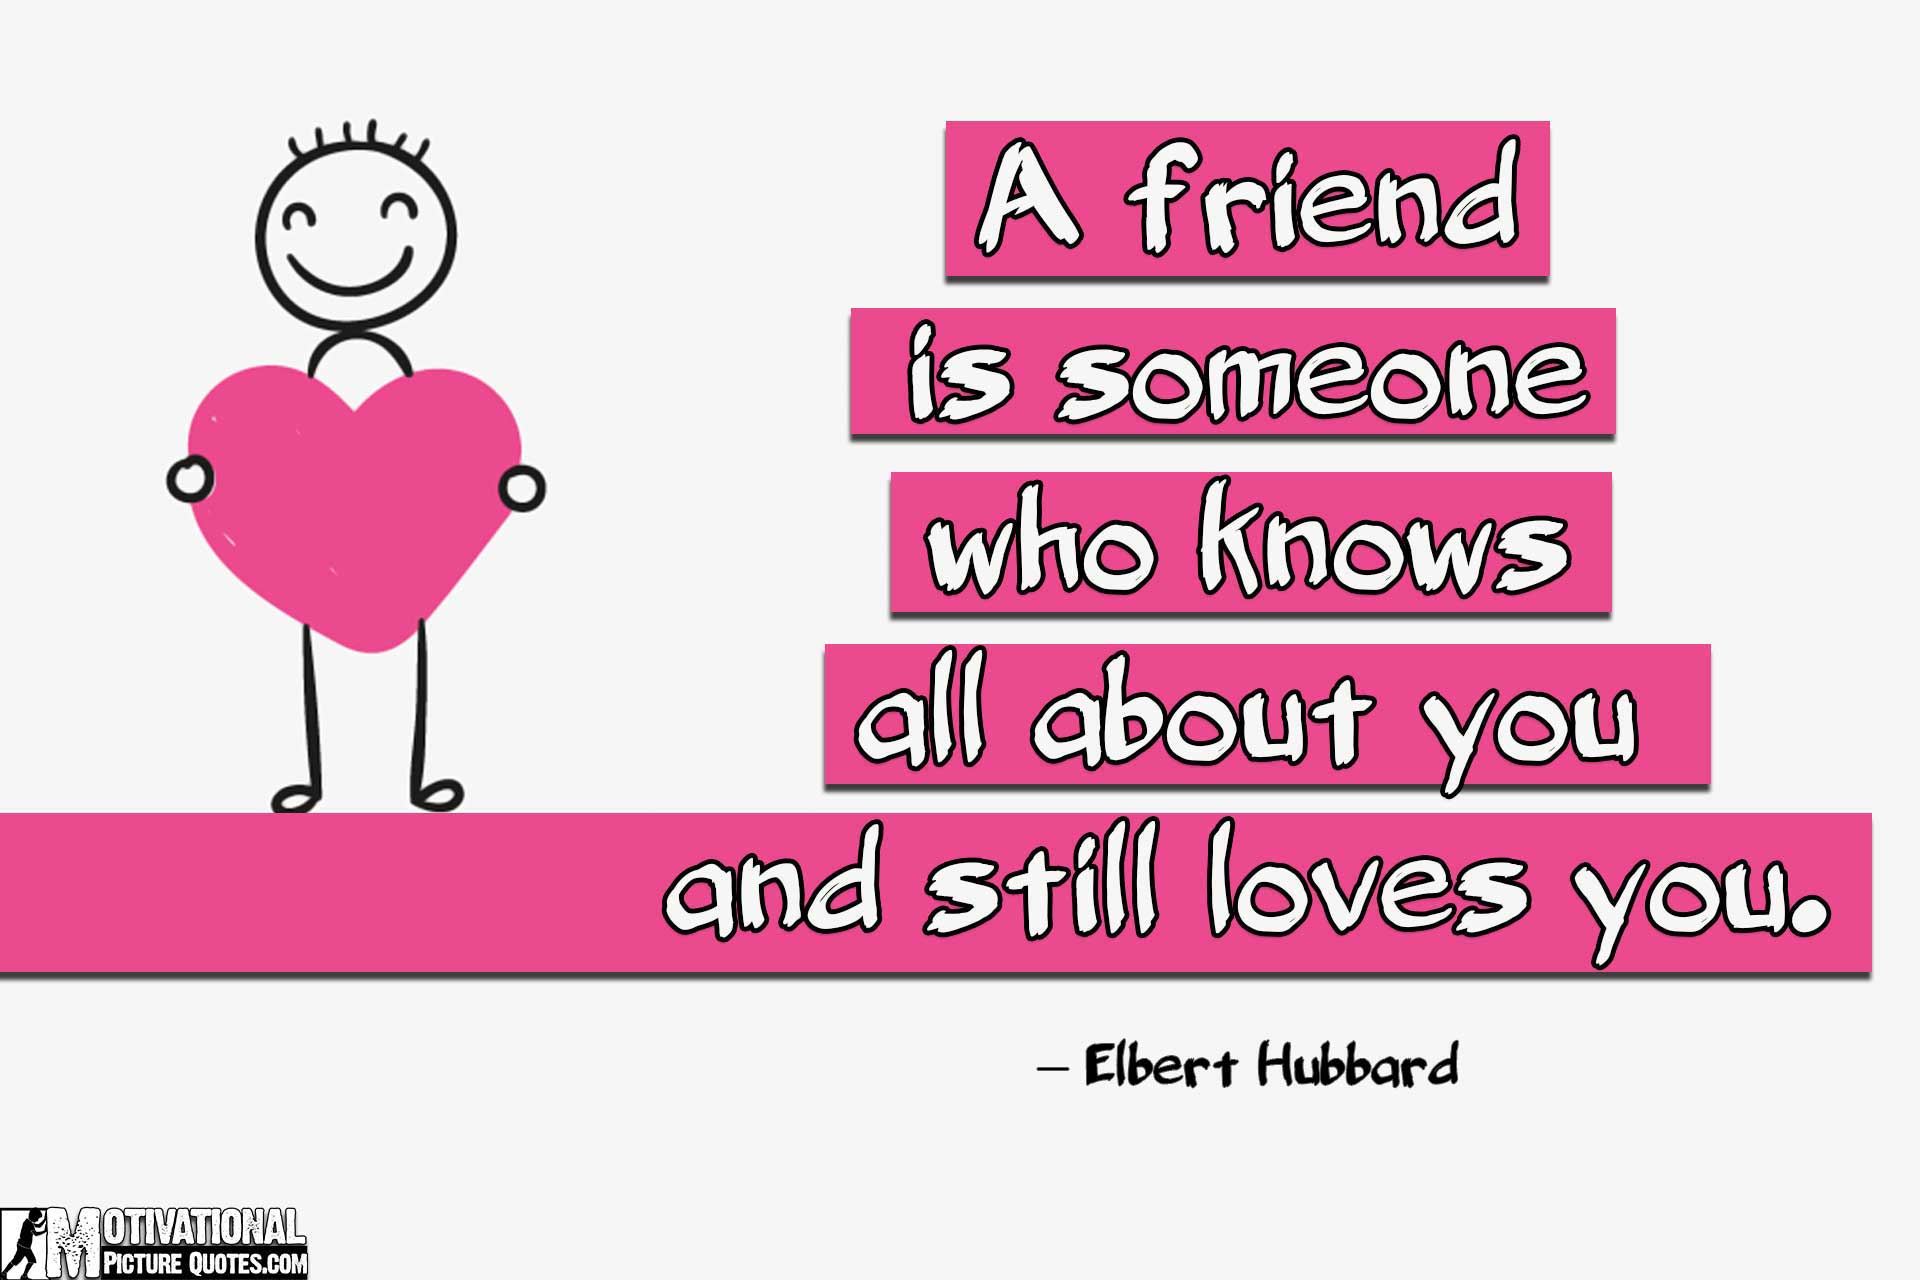 Heart Touching Friendship Quotes With Images - Love Heart Touching Cute Friendship  Quotes - 1920x1280 Wallpaper 